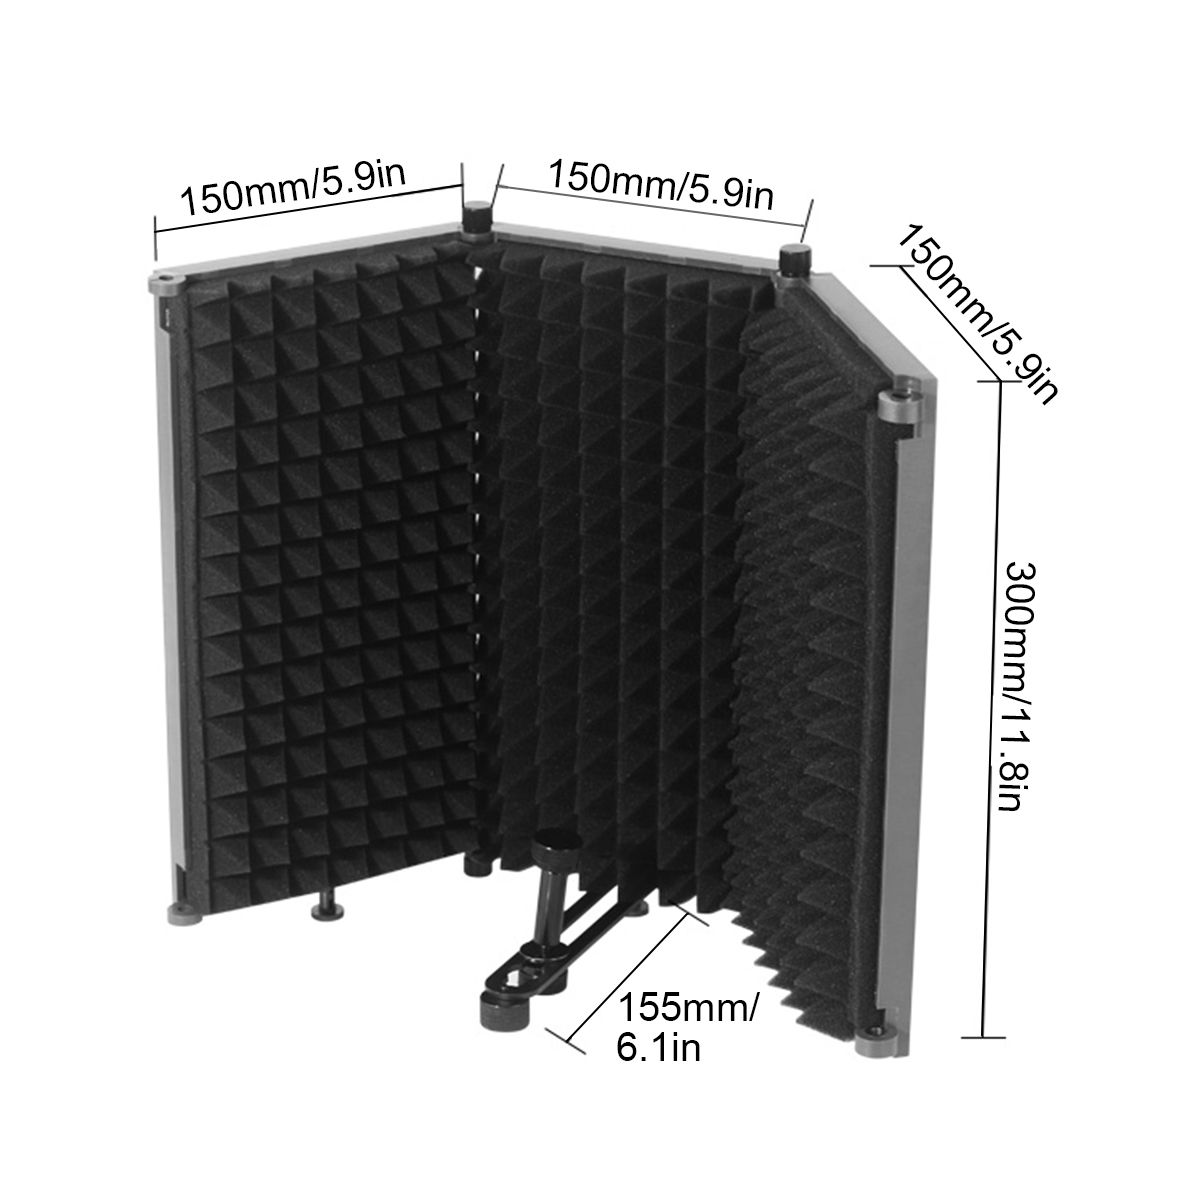 Foldable-Microphone-Acoustic-Isolation-Shield-Acoustic-Foams-Studio-Panel-for-Recording-Live-Broadca-1670638